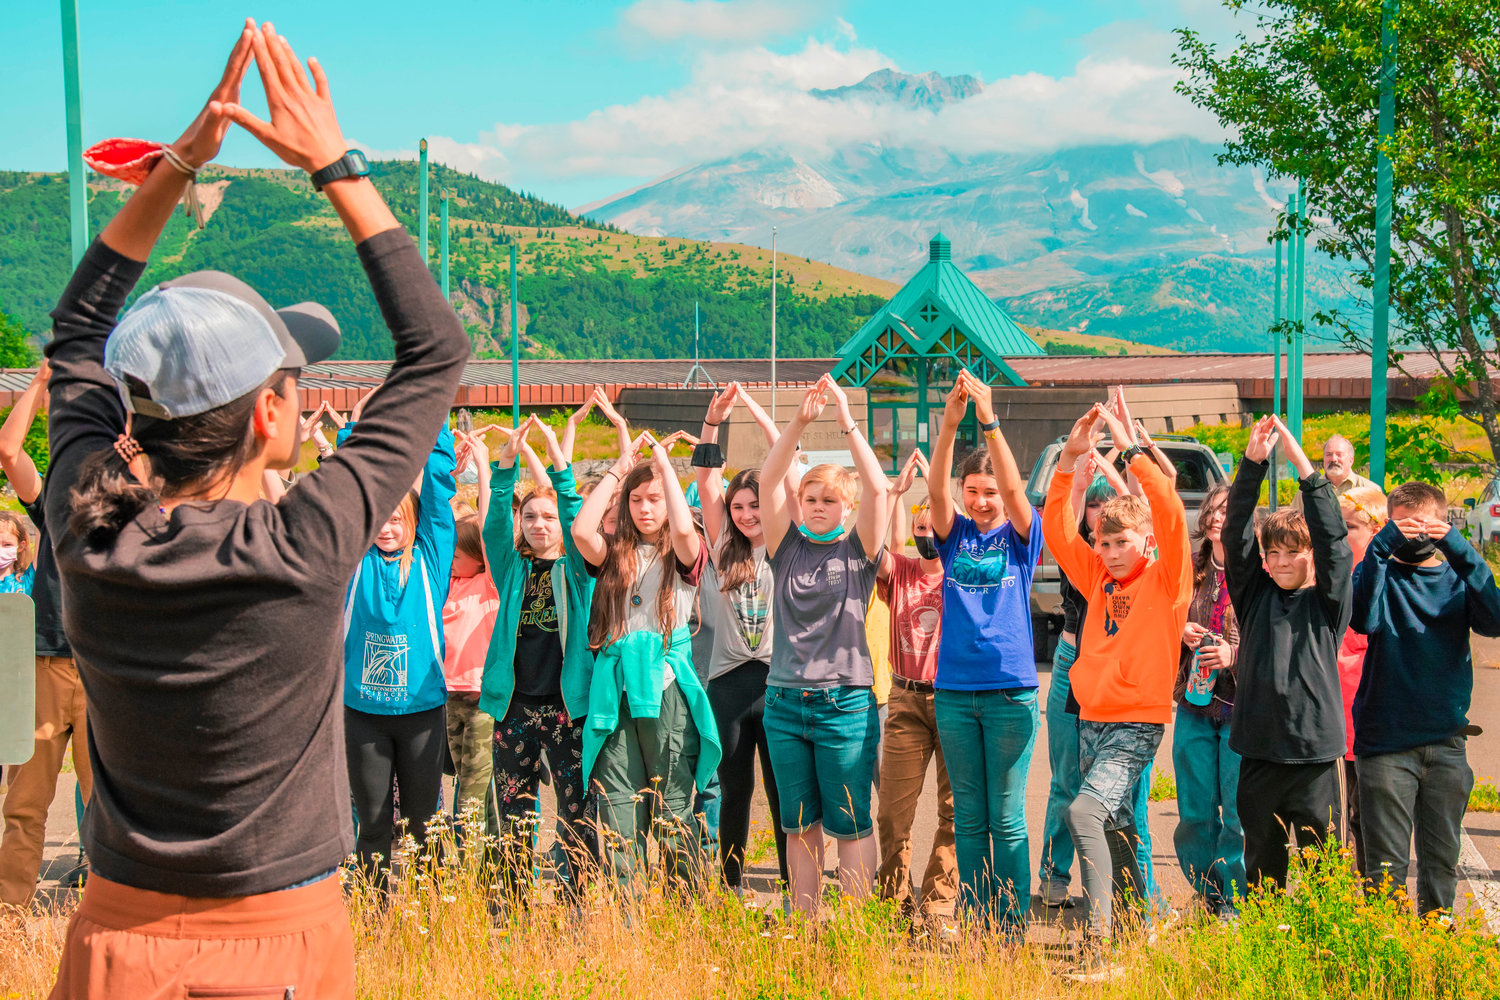 Students from the Springwater Environmental Sciences School in Oregon with the Mount St. Helens Insitute participate in a physical activity to learn about the eruption Thursday afternoon outside the Mount St. Helens Science and Learning Center in Toutle.